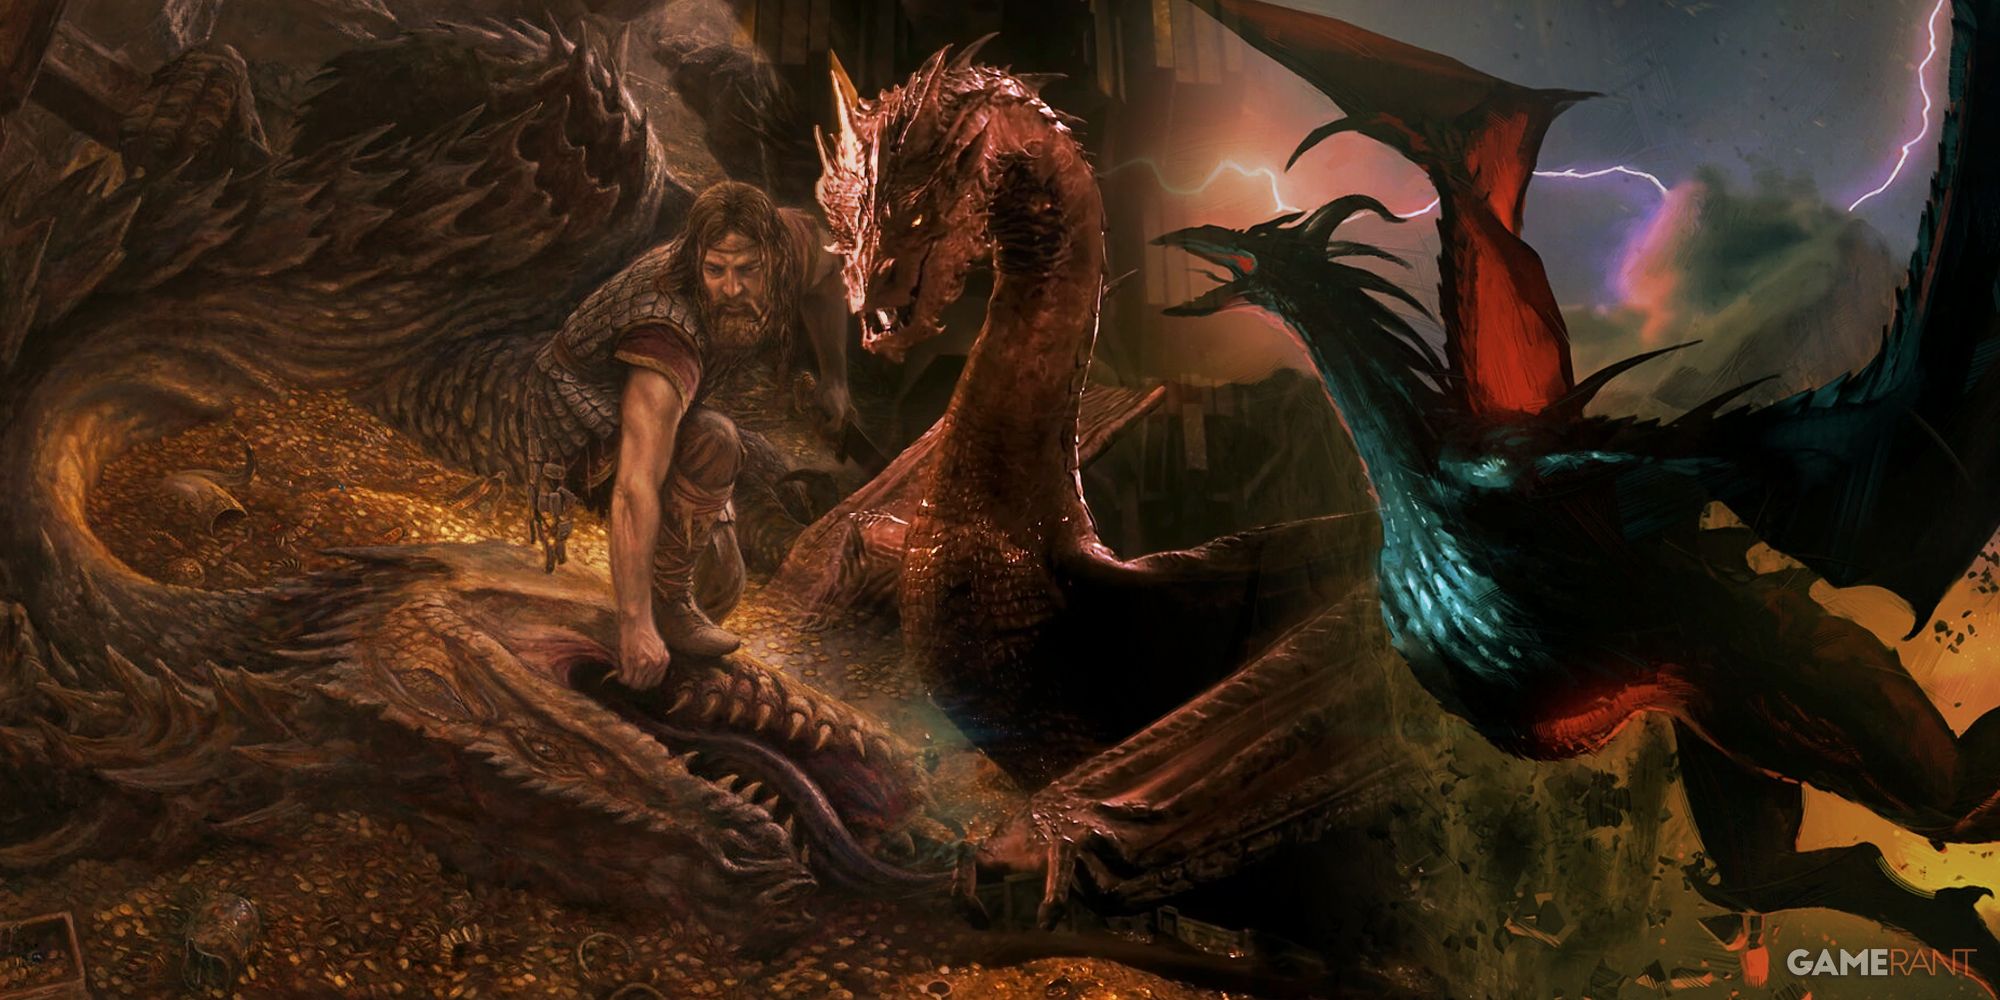 Lord Of The Rings dragons Scatha The Worm, Smaug The Golden, Gostir